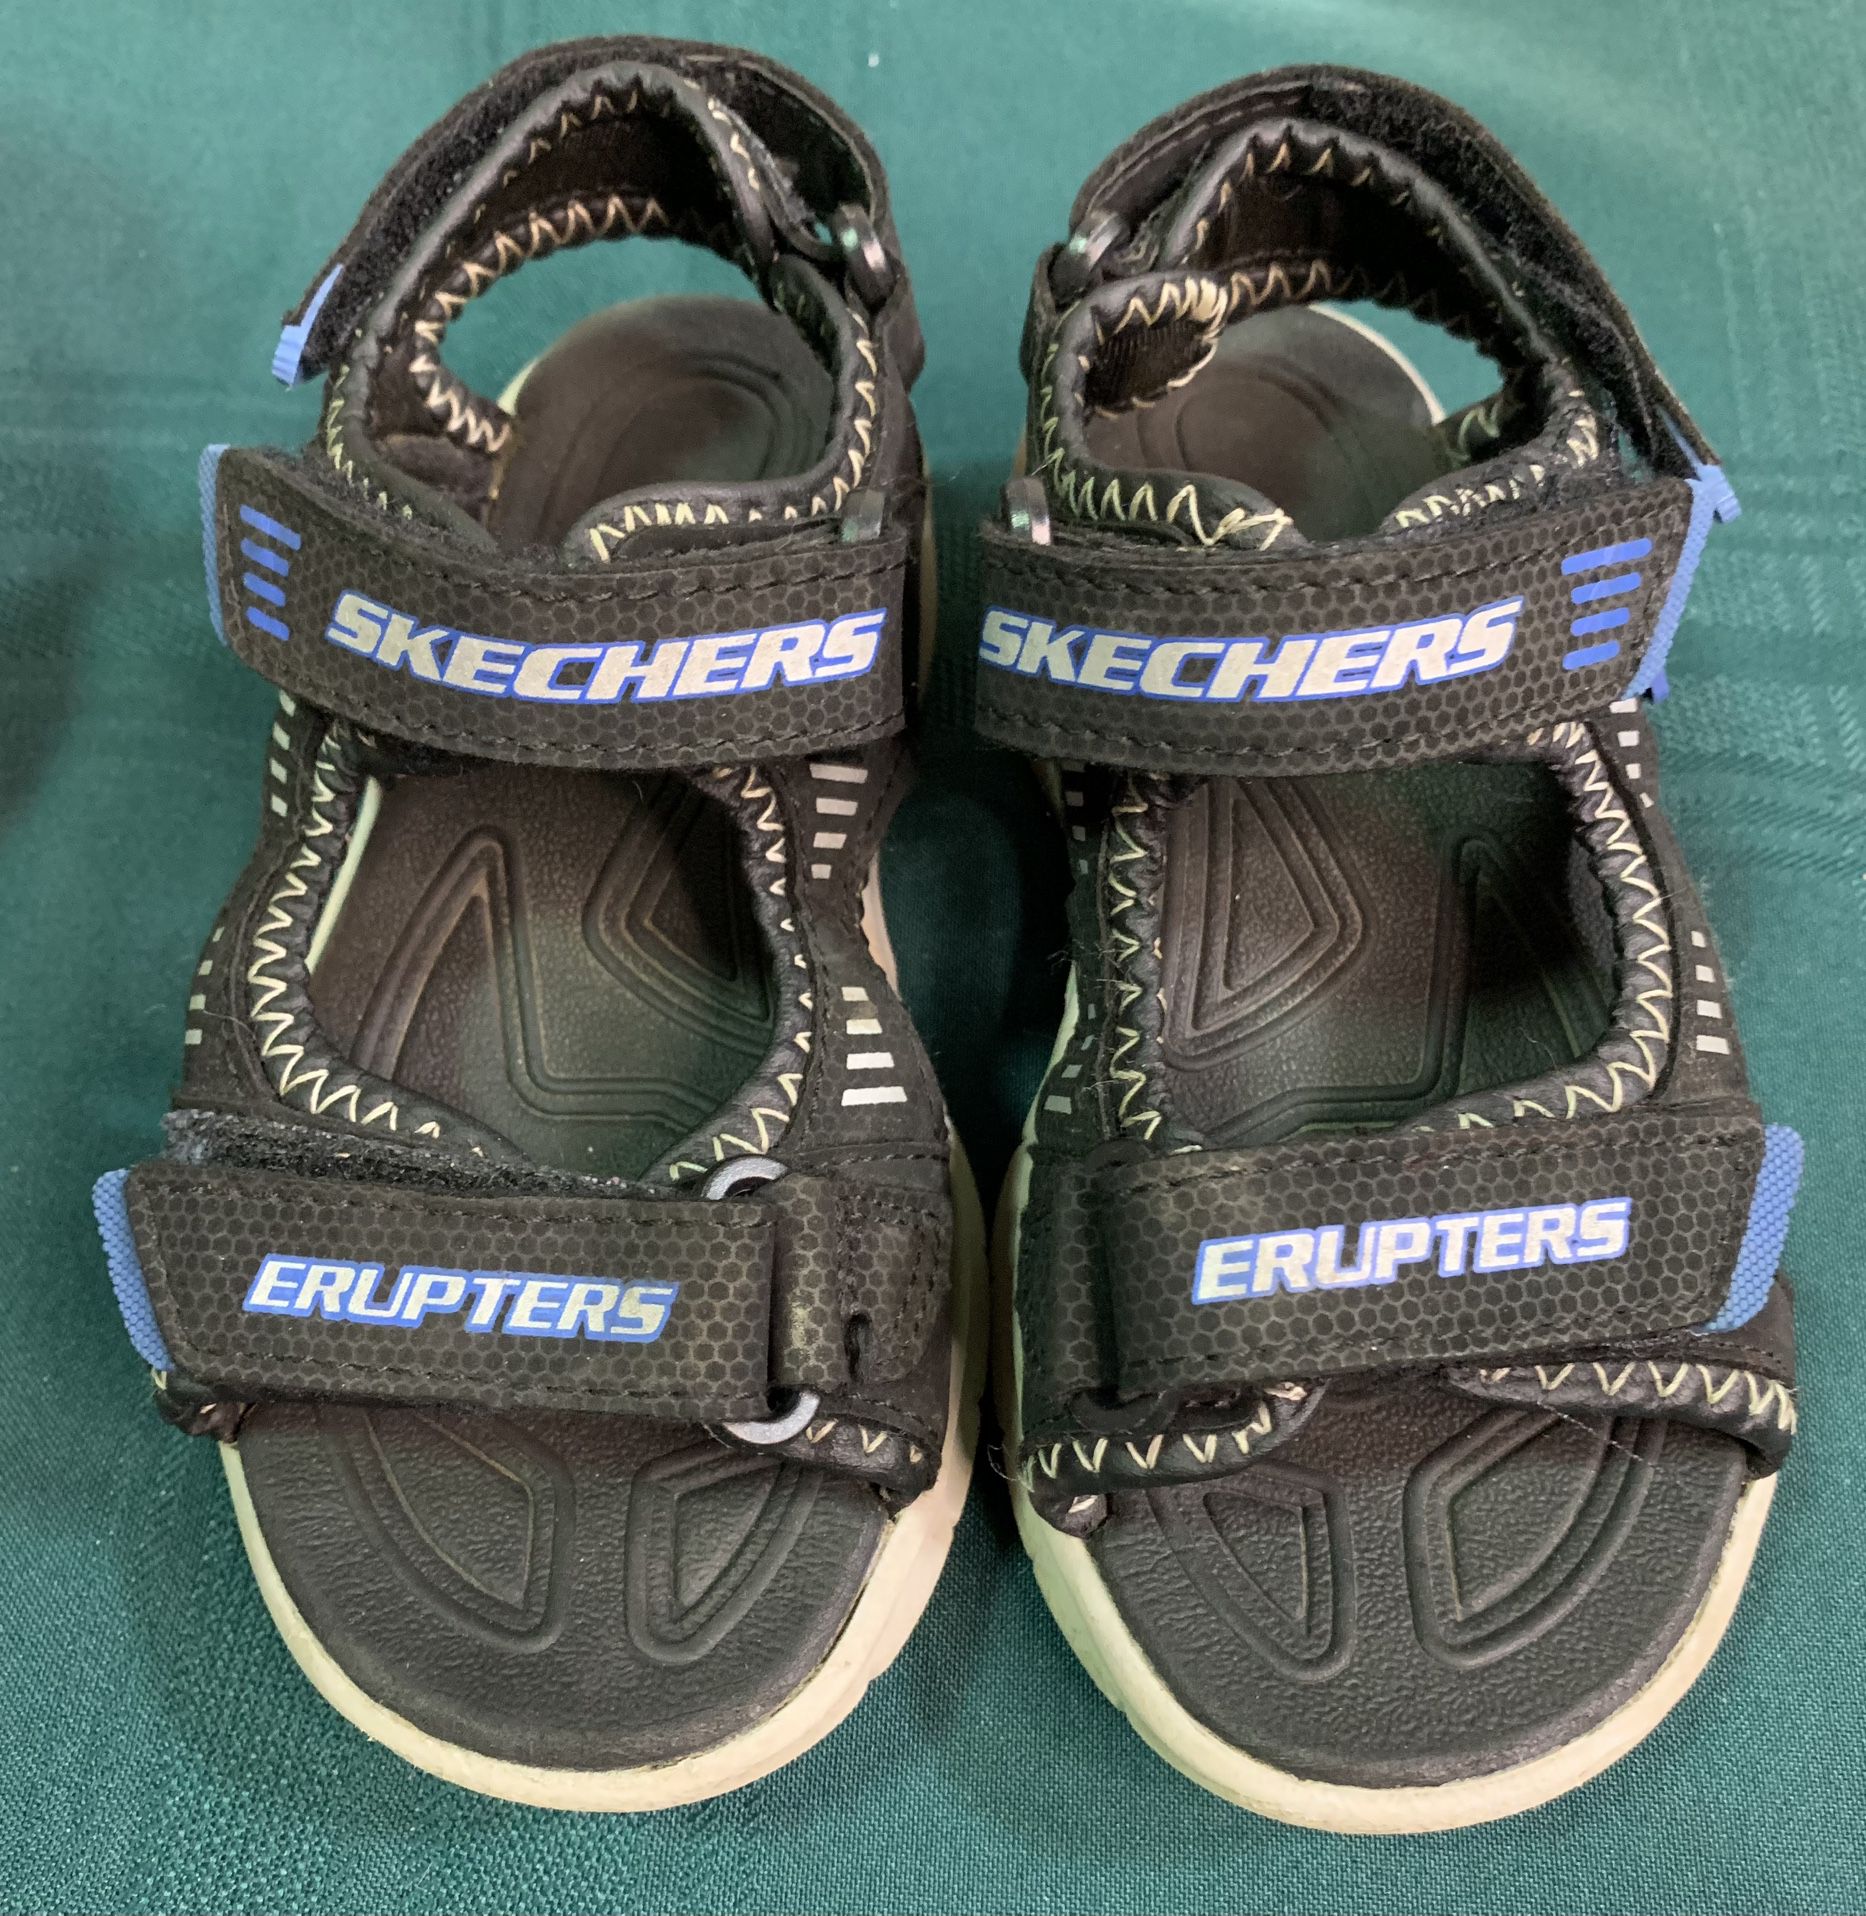 Skechers Erupters boys size 11 light up sandals shoes with adjustable velcro straps 